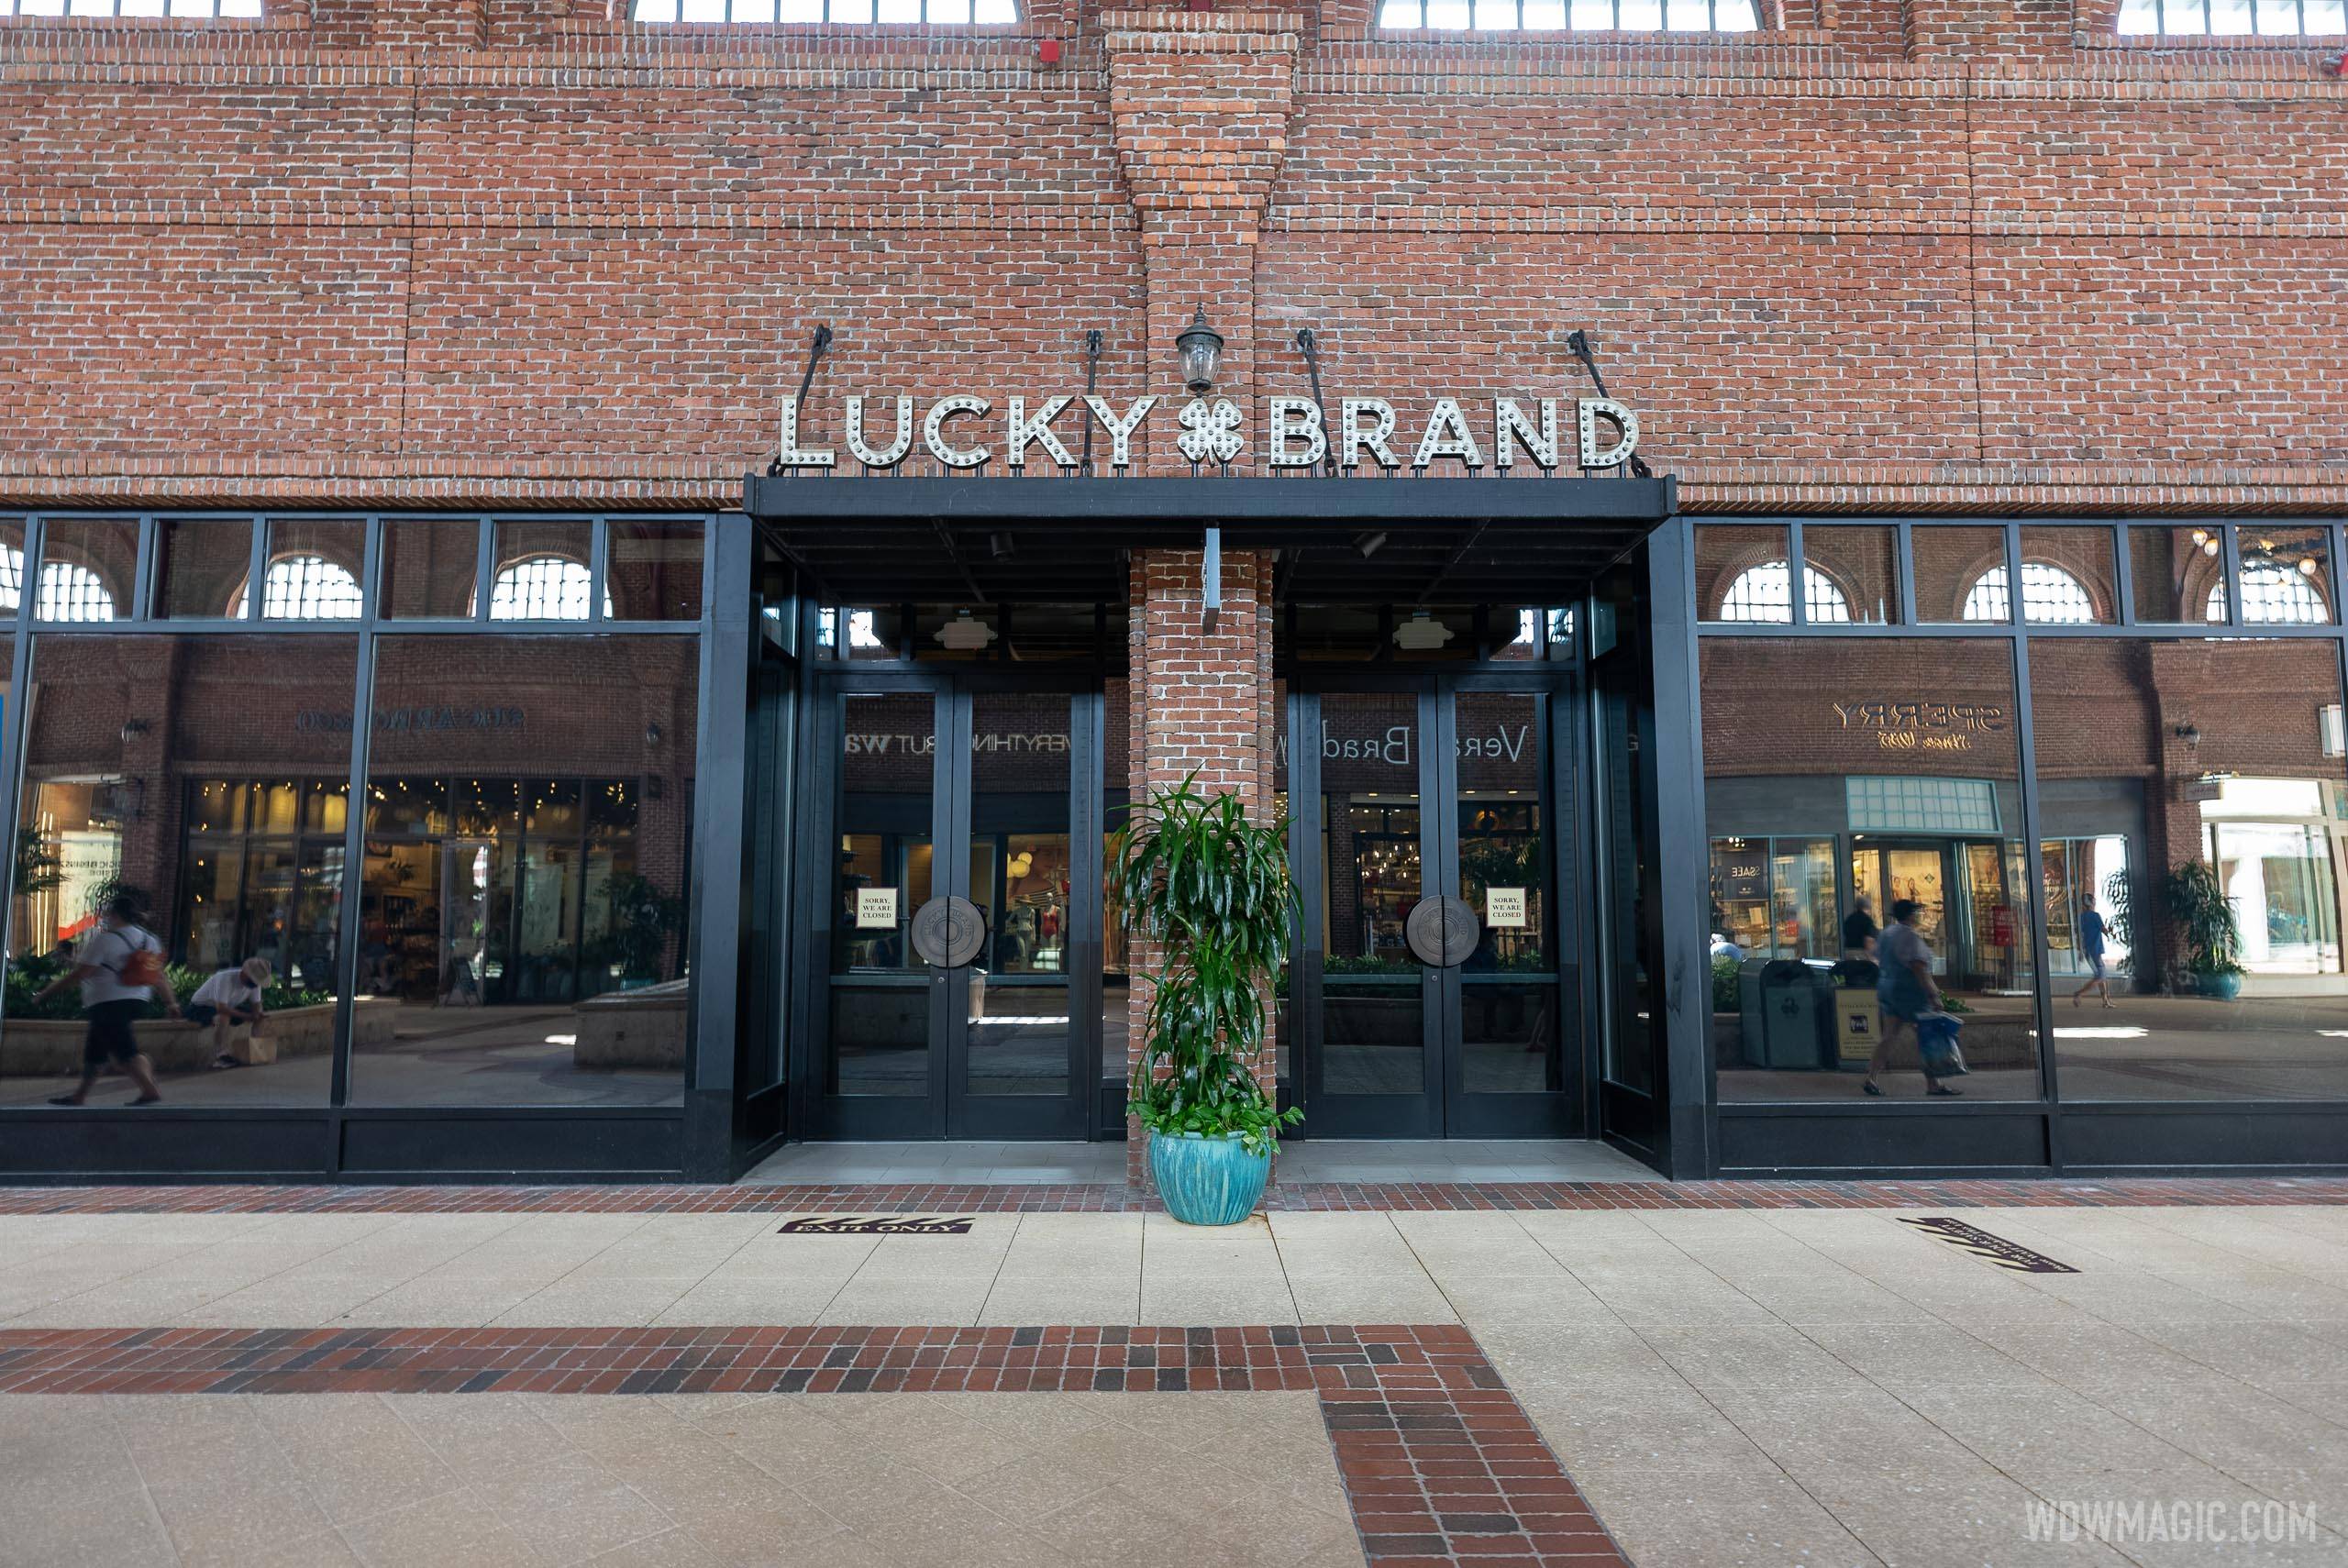 Fit2Run is expected to move into the former Lucky Brand store